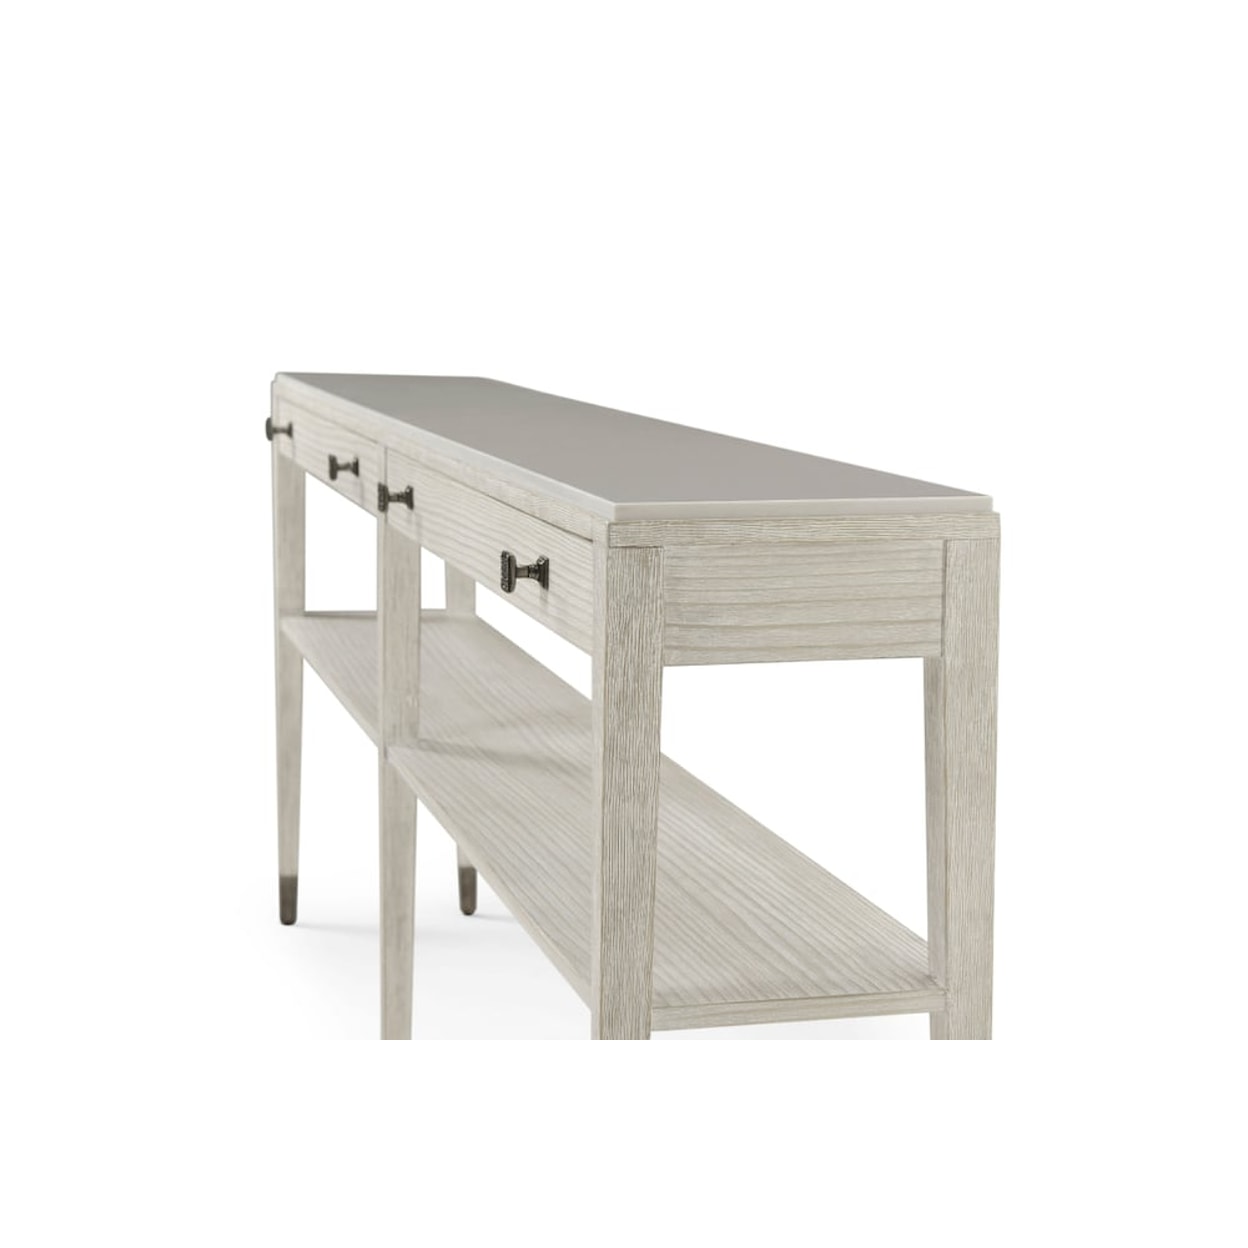 Theodore Alexander Breeze Console Table with Storage